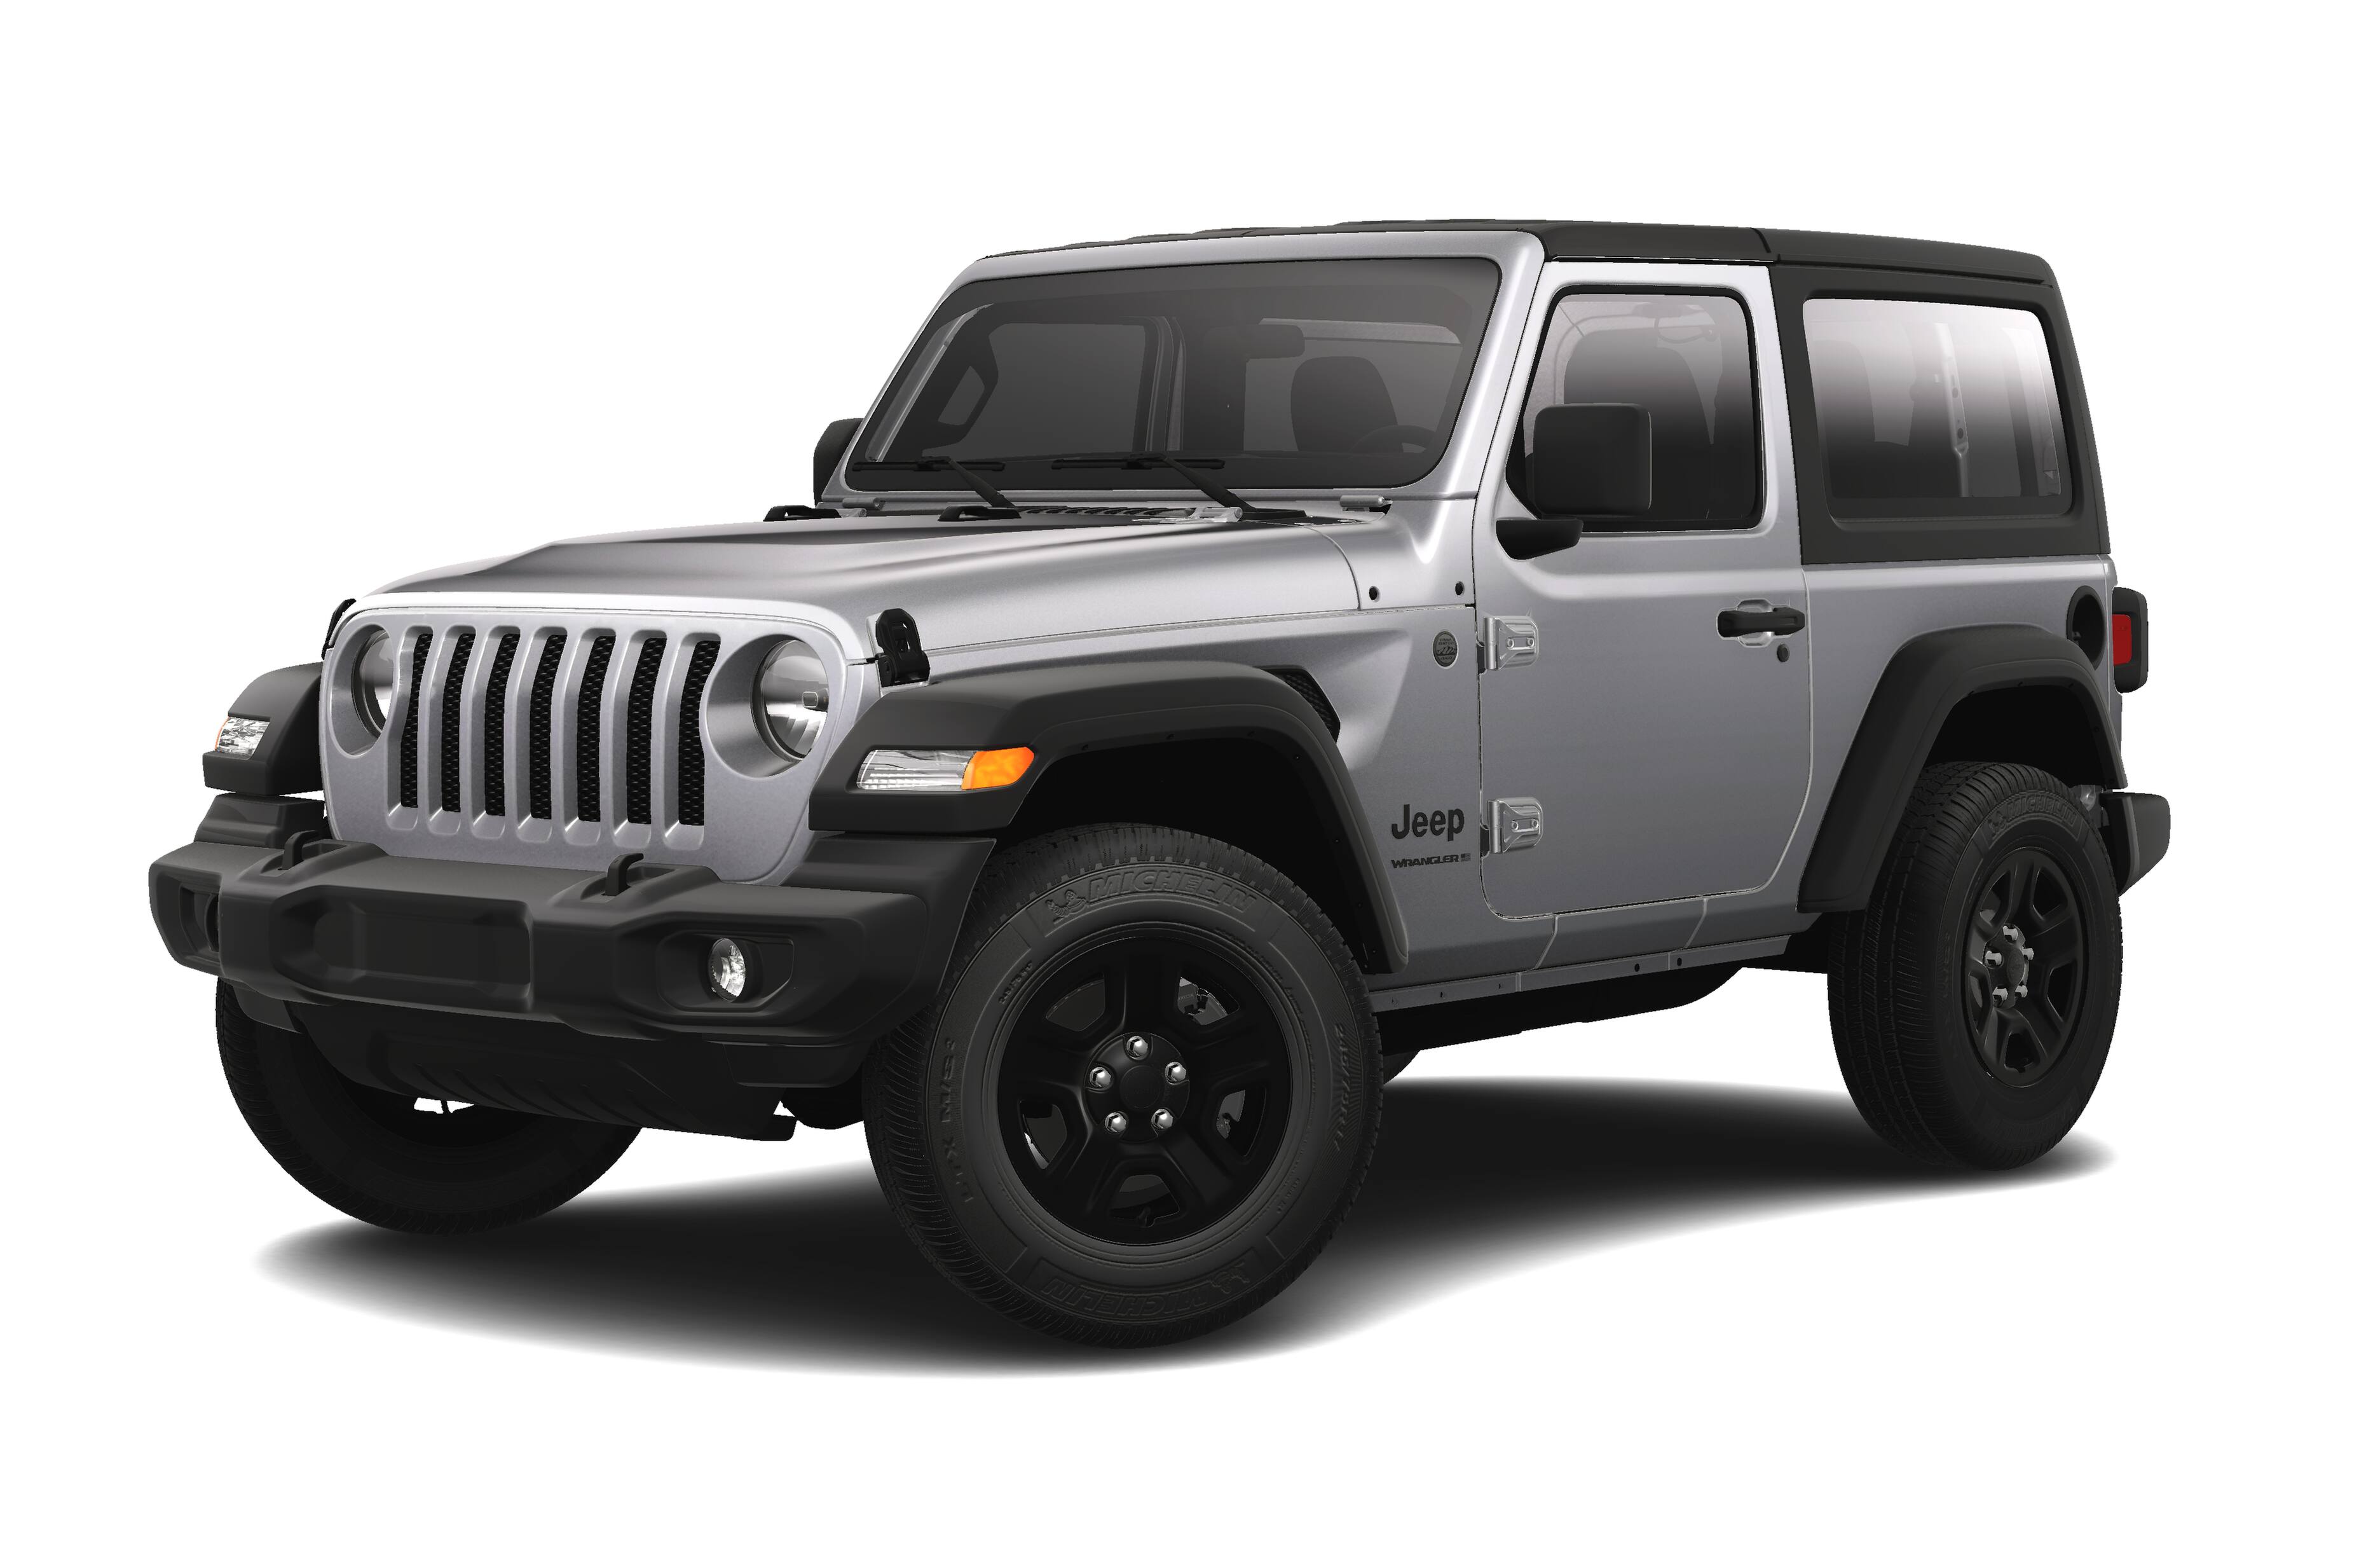 New Jeep Wrangler for Sale in Woburn, MA